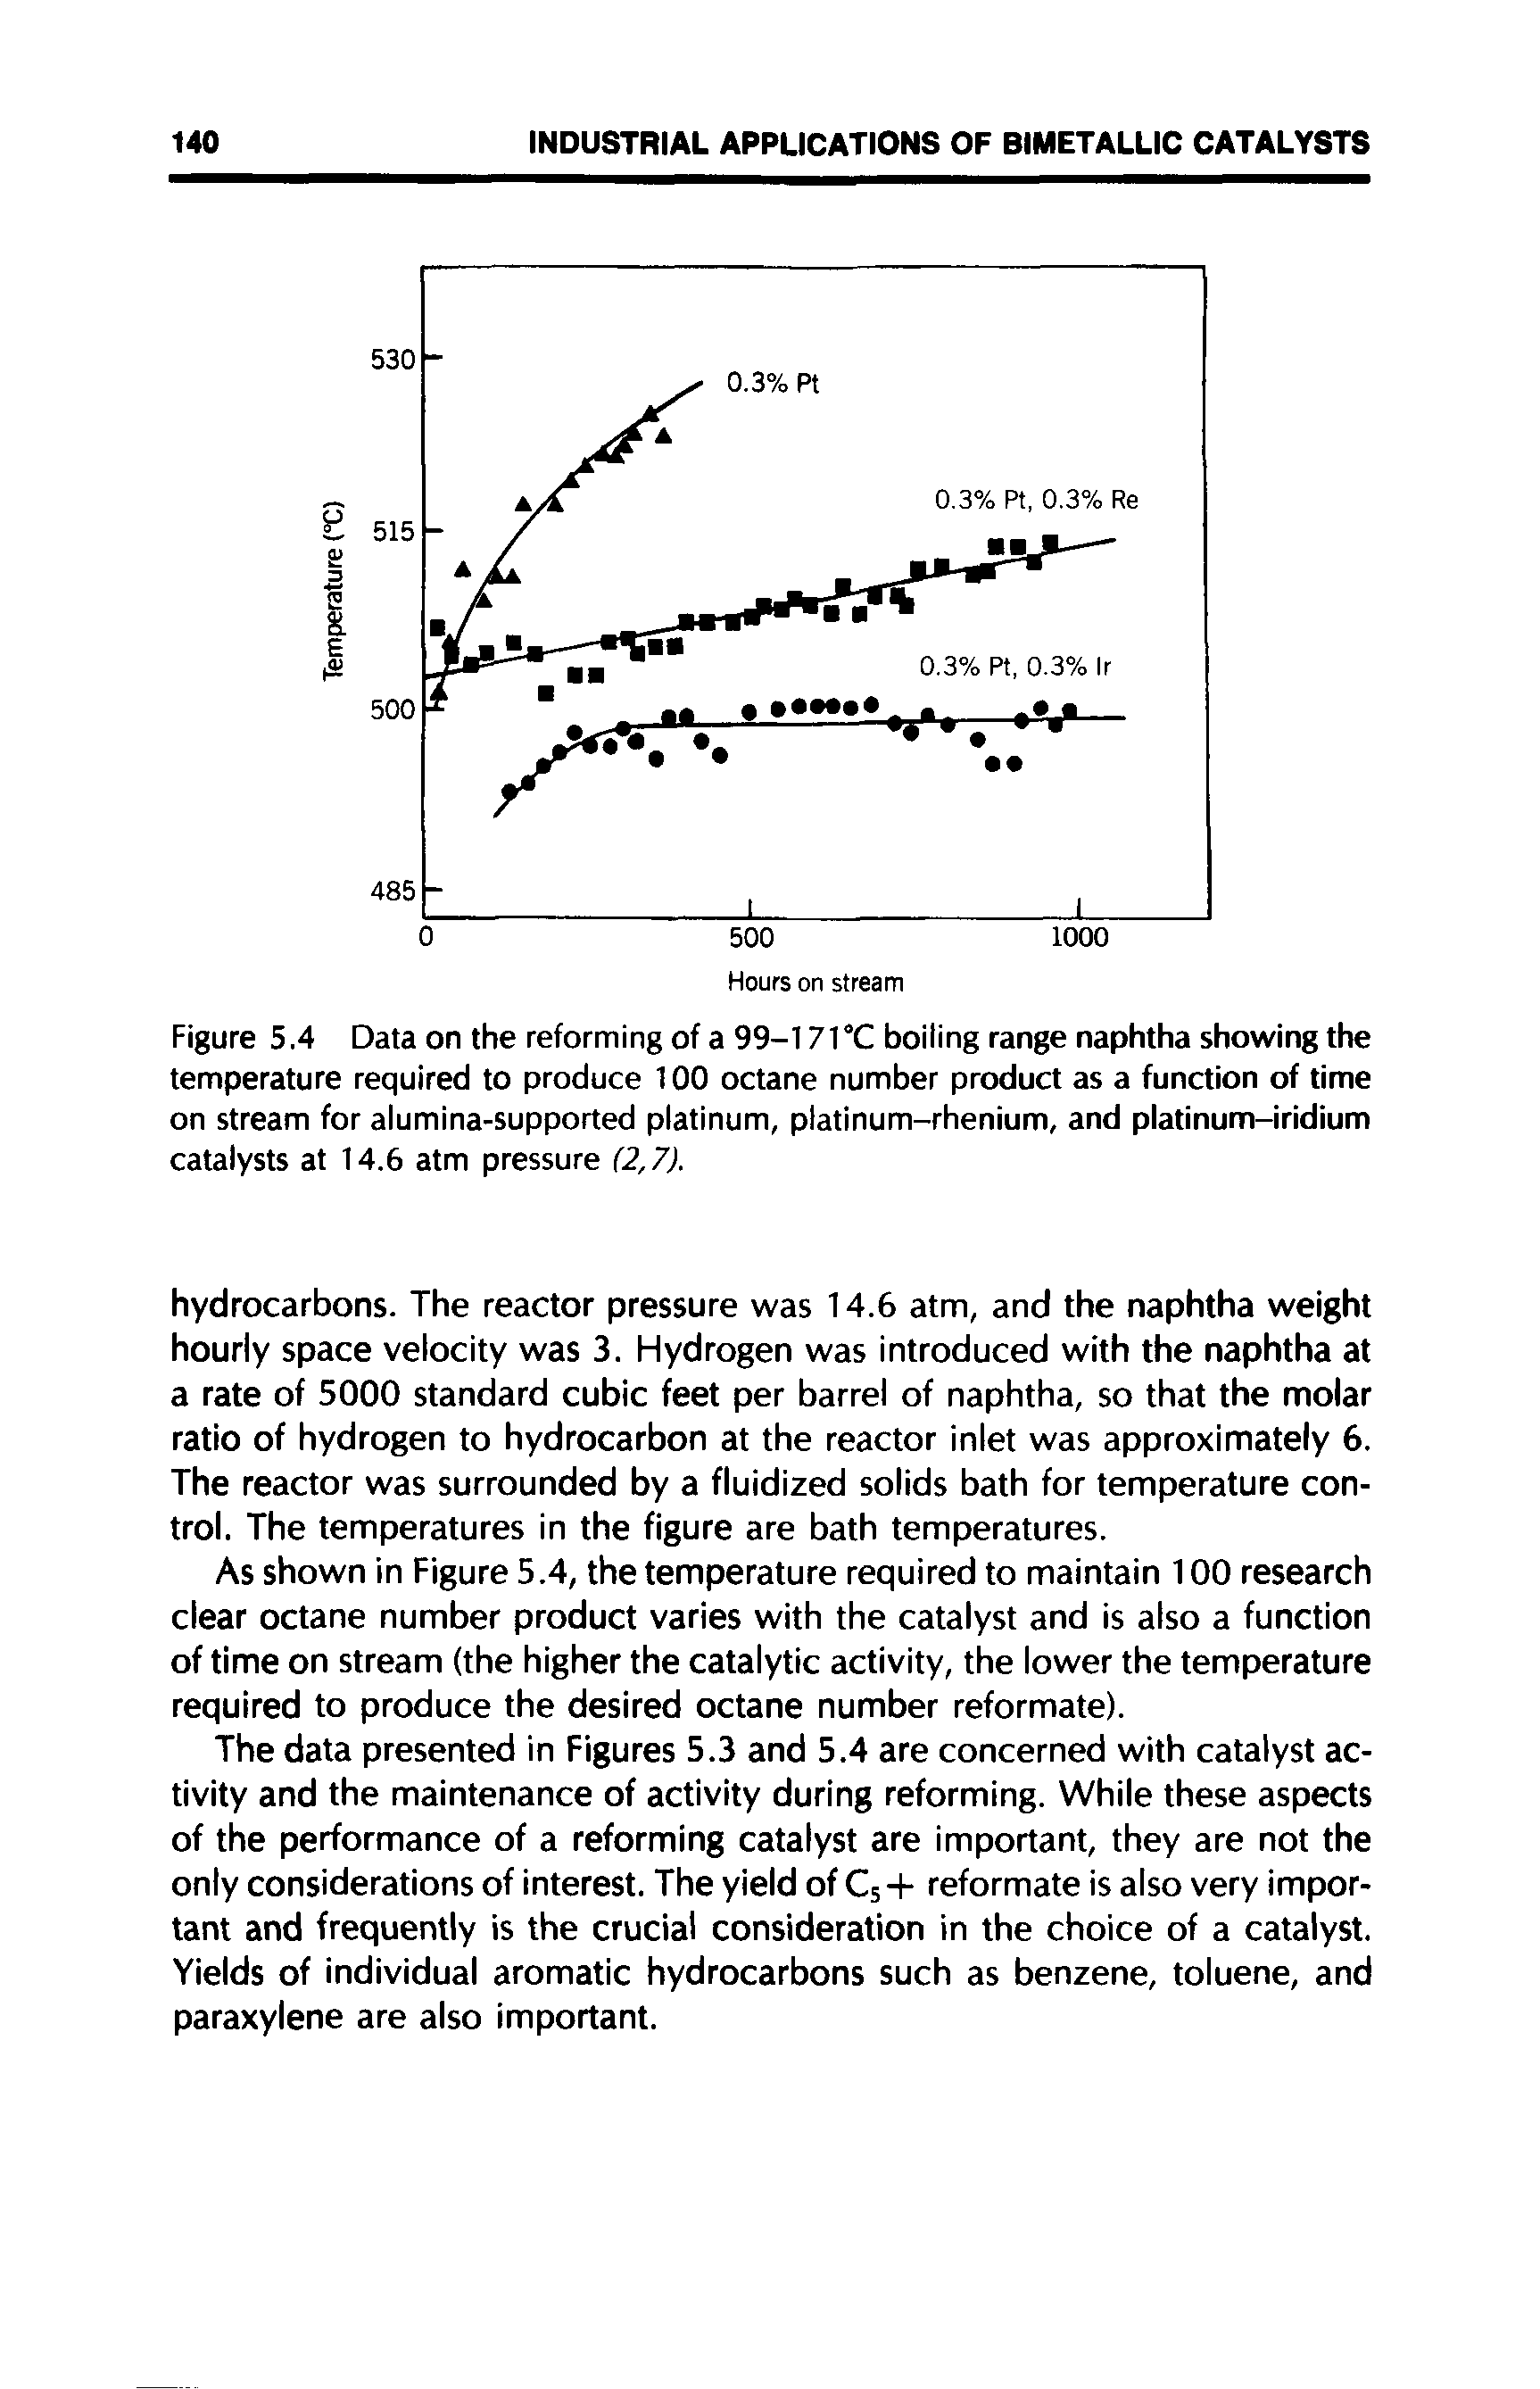 Figure 5.4 Data on the reforming of a 99-17fC boiling range naphtha showing the temperature required to produce 100 octane number product as a function of time on stream for alumina-supported platinum, platinum-rhenium, and platinum-iridium catalysts at 14.6 atm pressure (2,7).